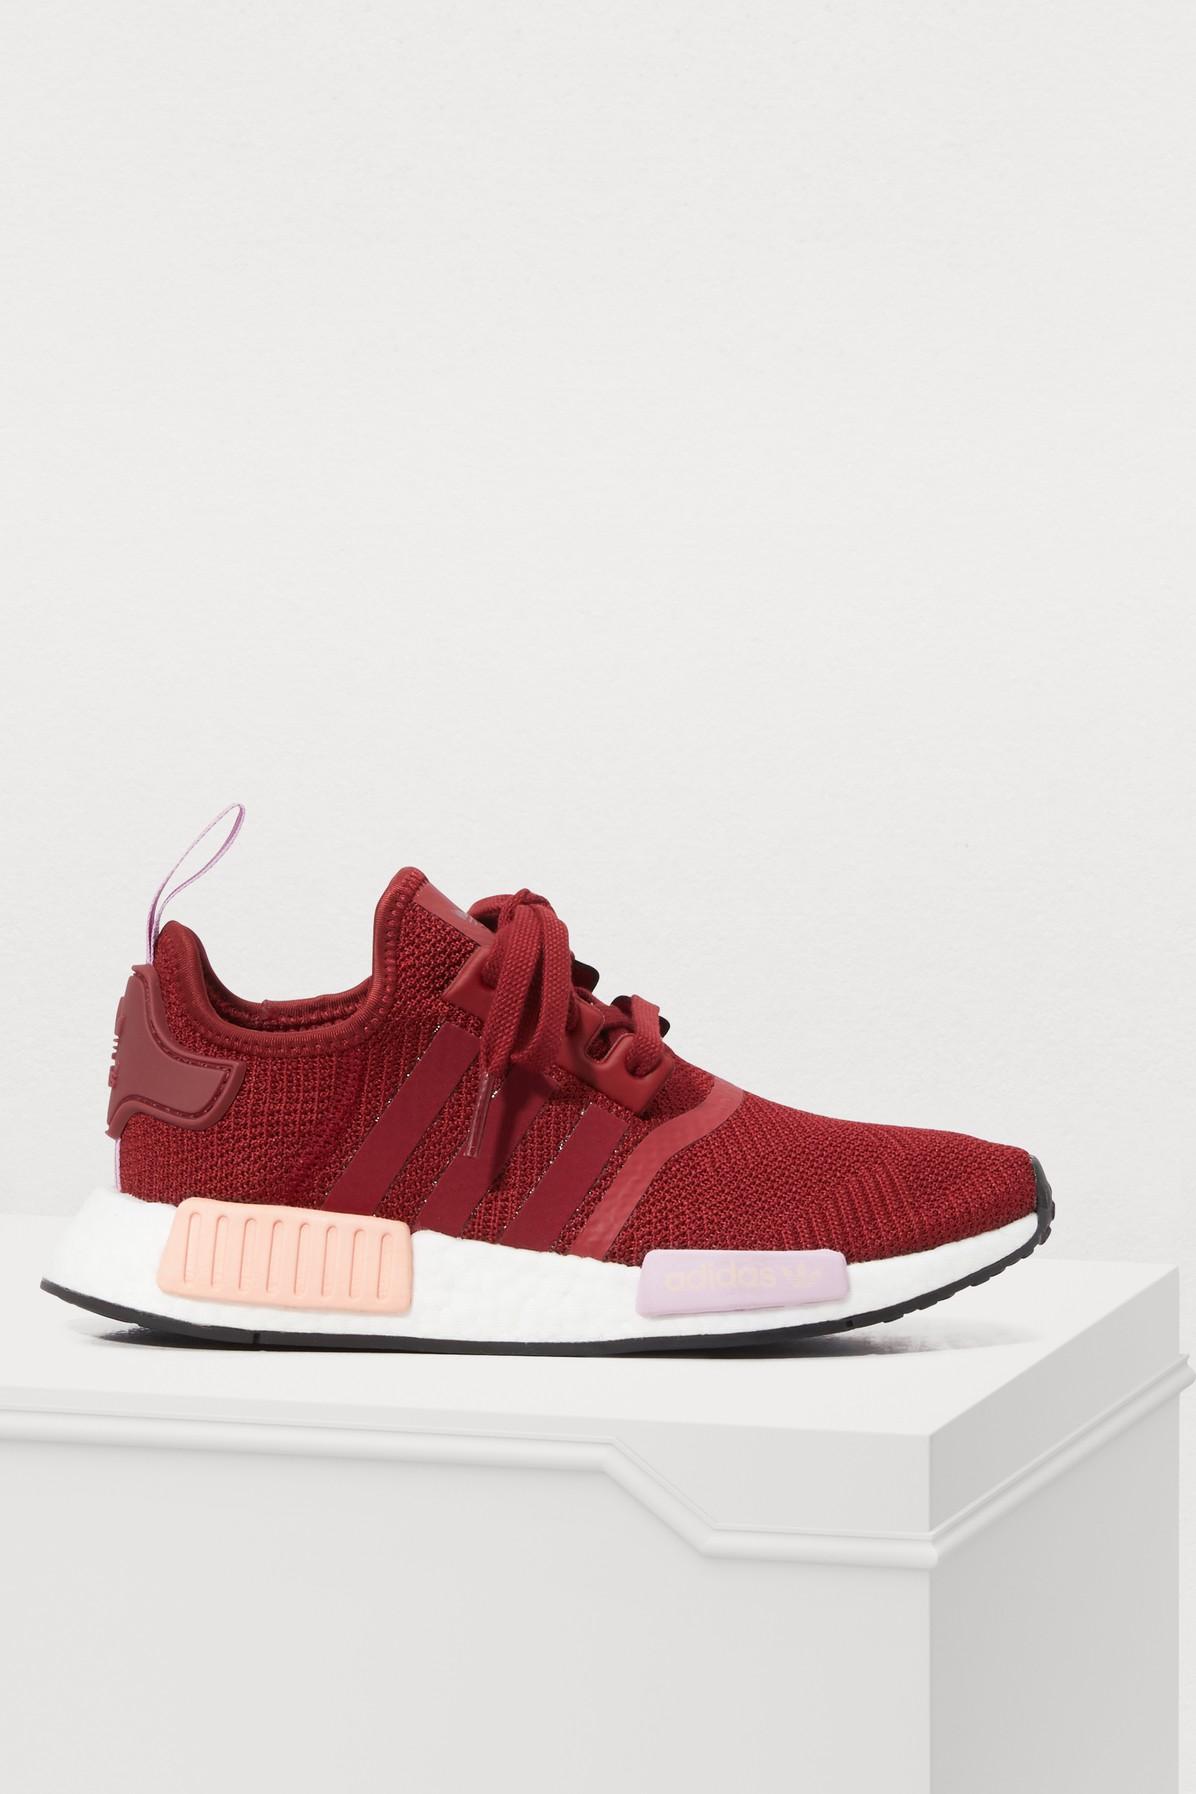 adidas nmd xr1 Bordeaux homme, significant discount Save 82% available -  urbanitta.com